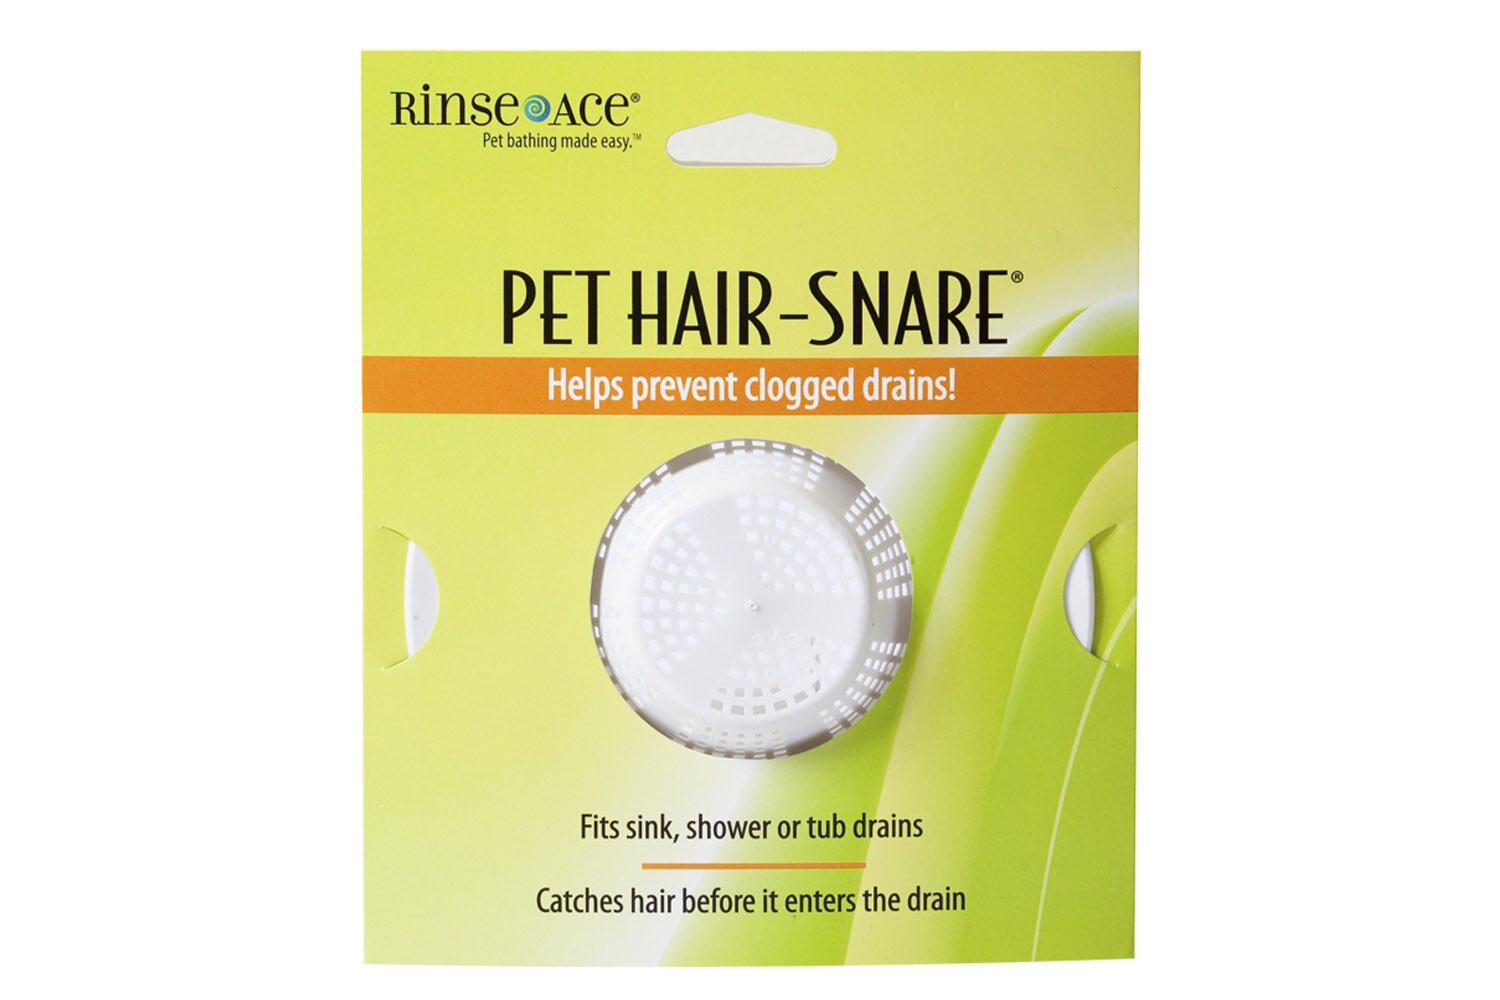 https://rinseace.com/Content/images/petshowers/packages/HairSnarePackage_1500_72dpi.jpg